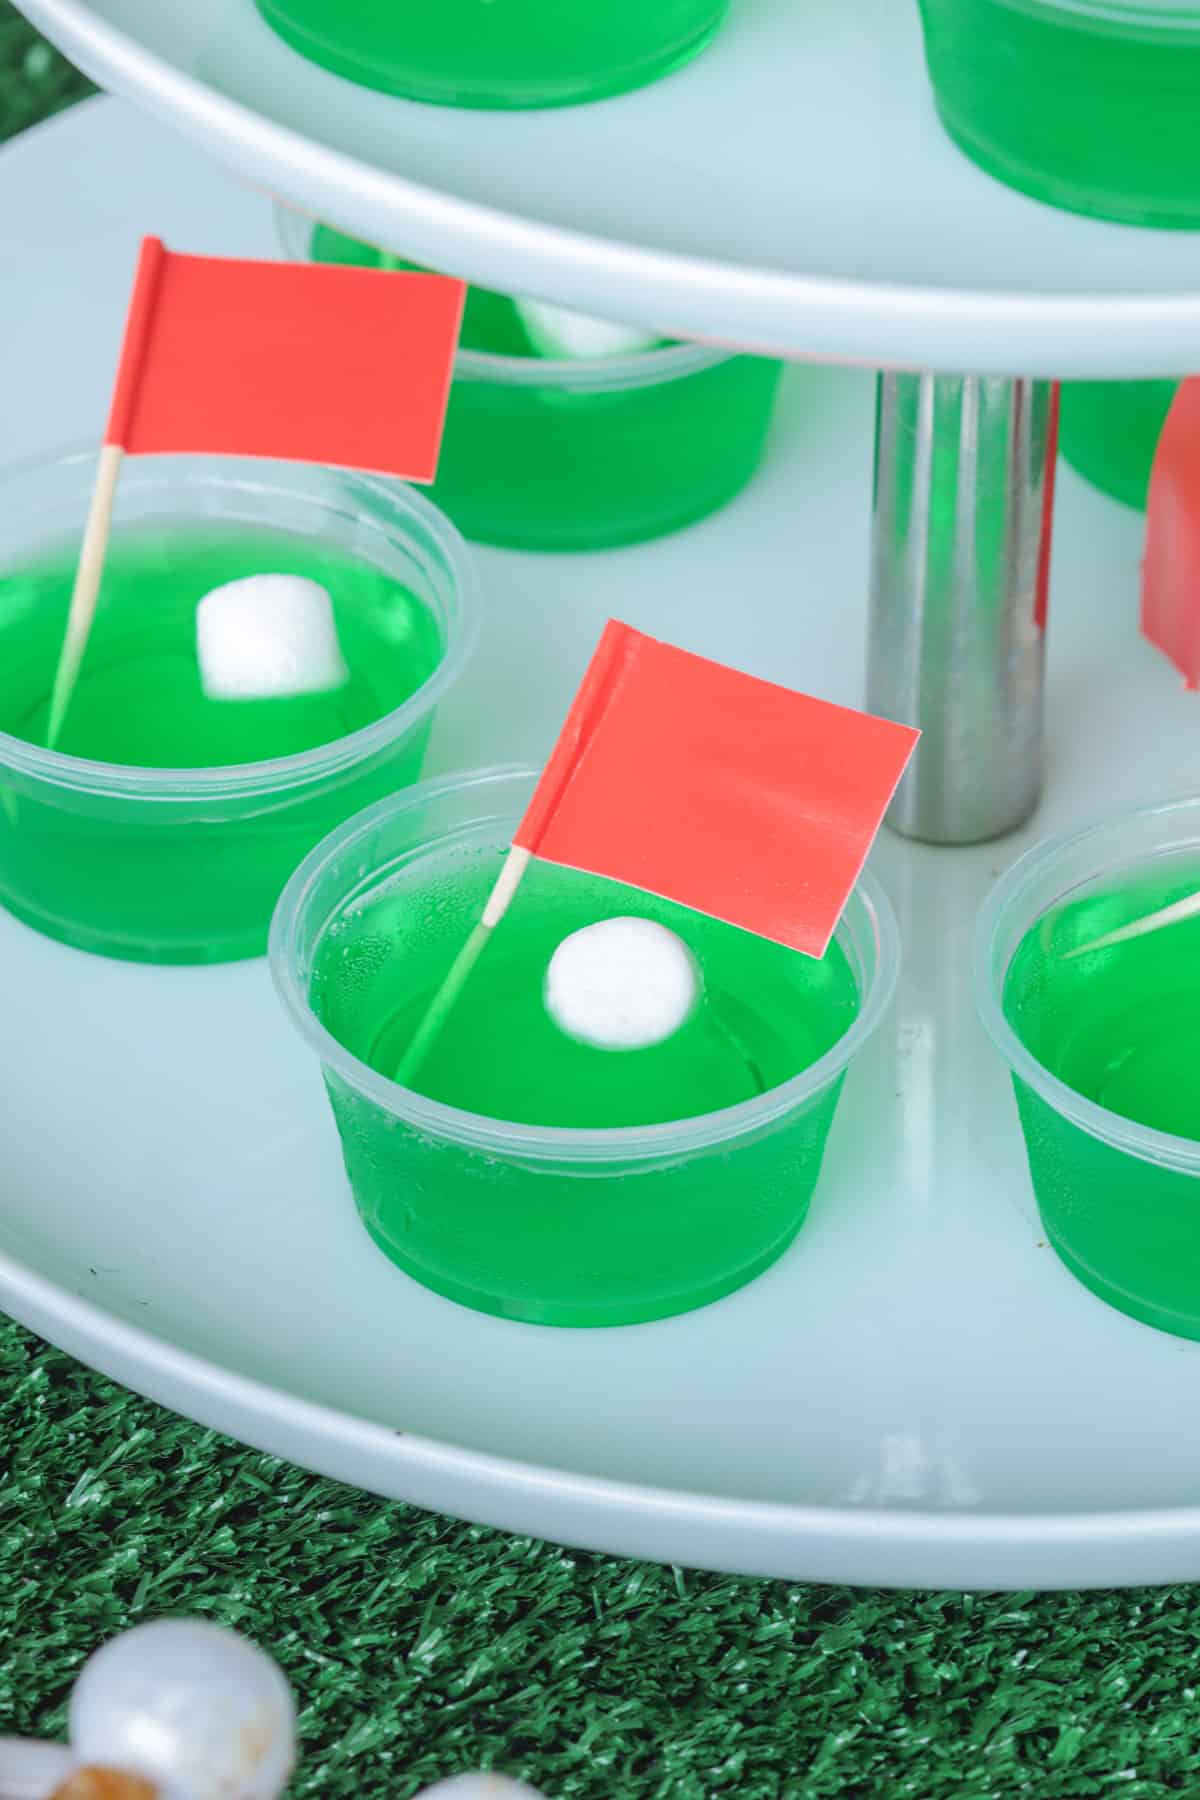 Green Jello shots with red flags and white marshmallow ball.